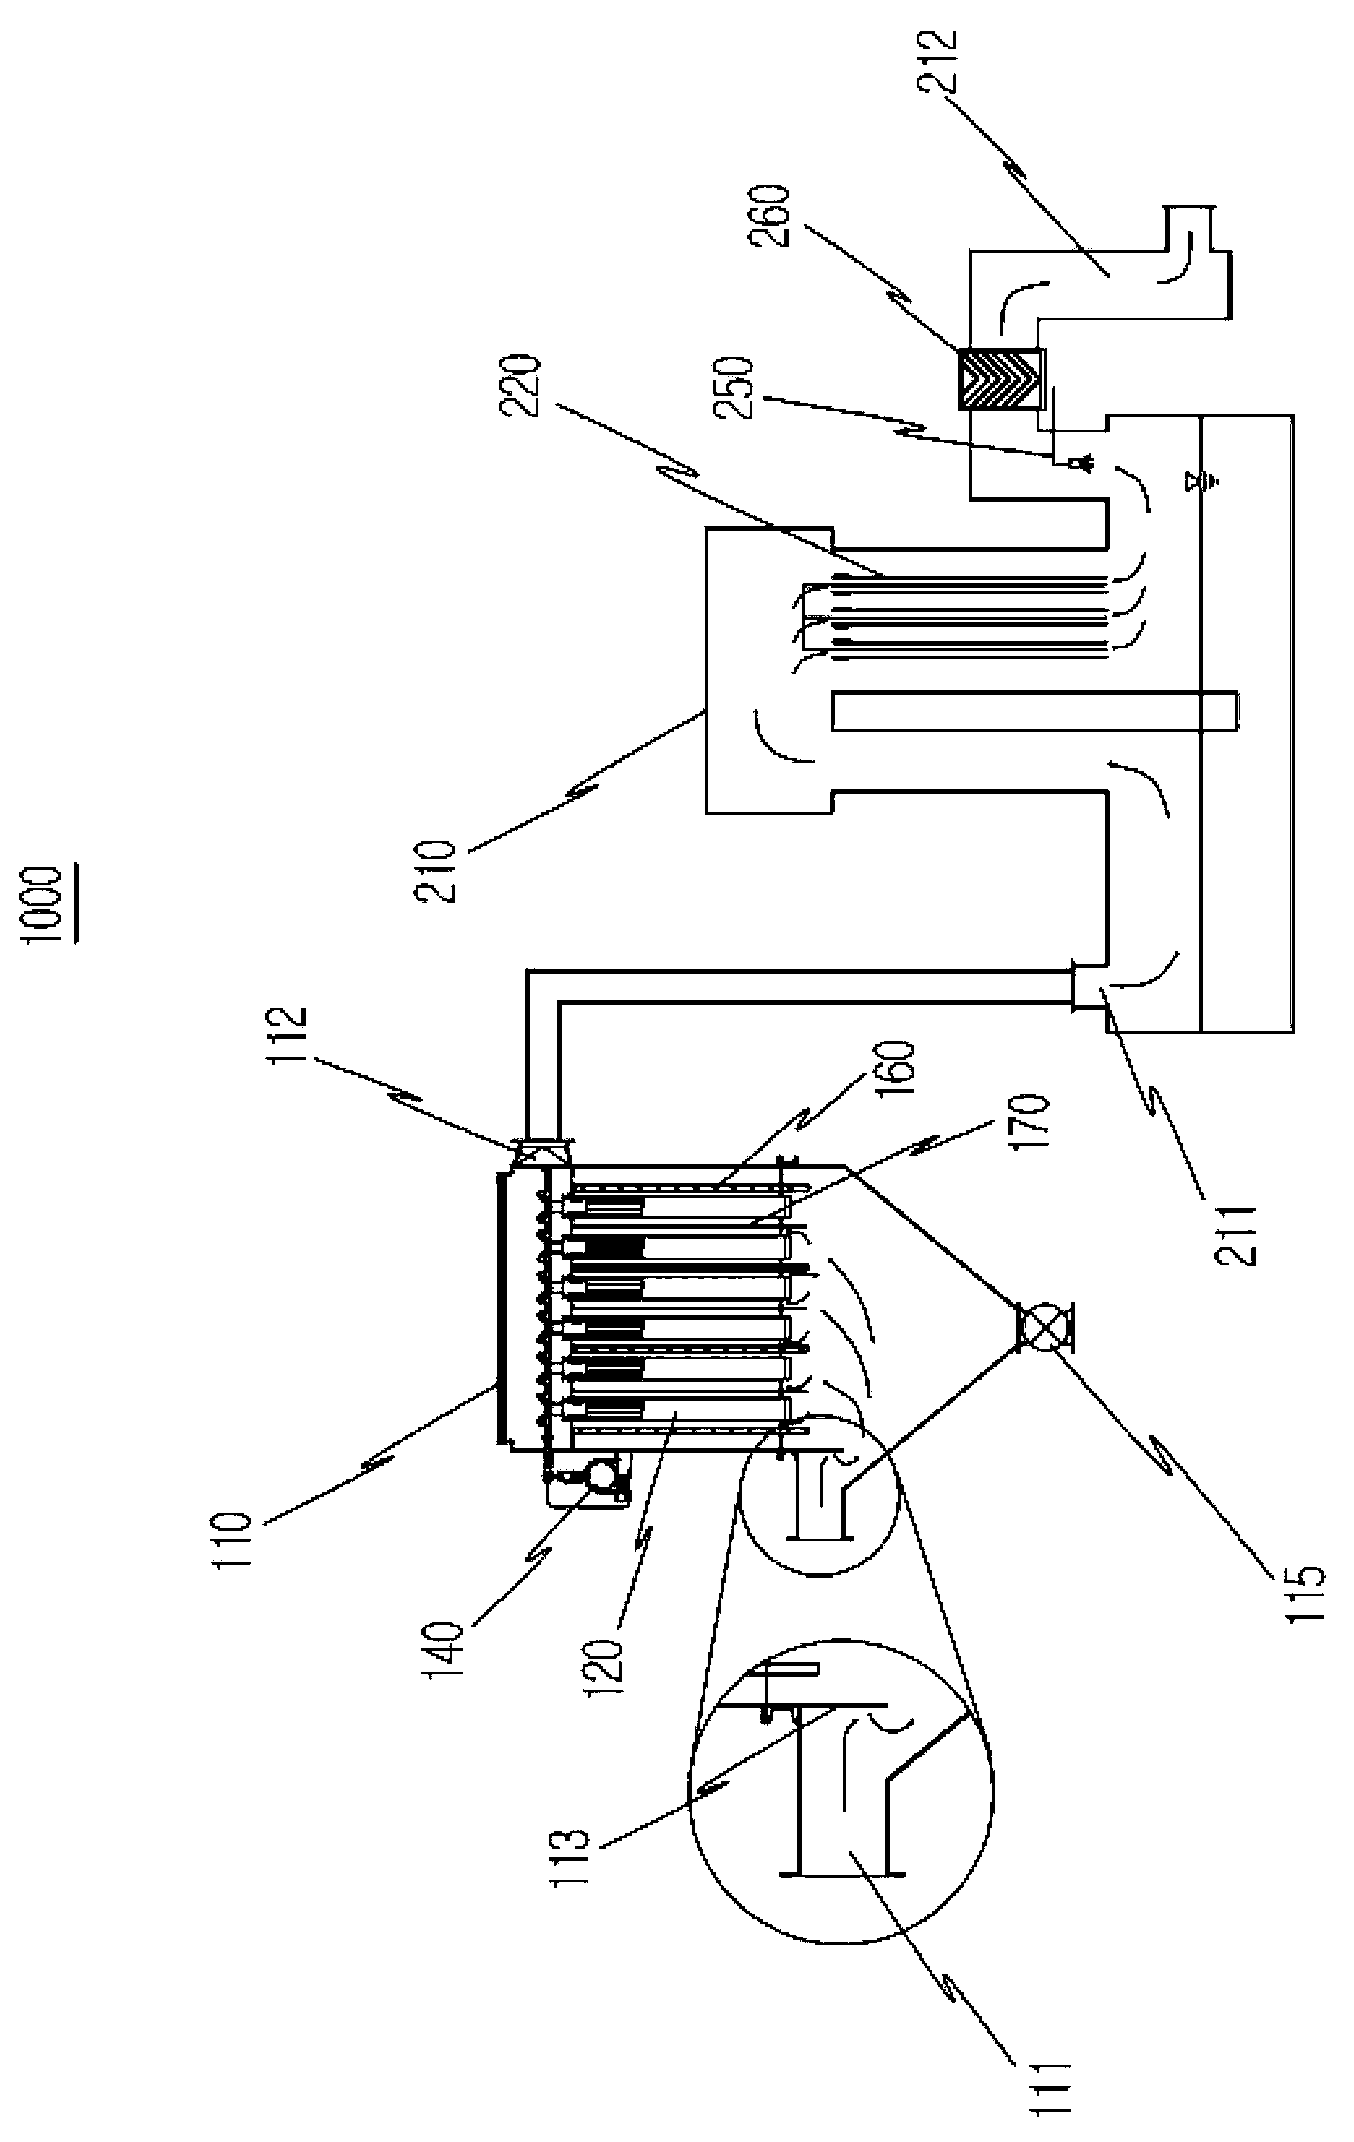 Simultaneous complex treatment apparatus for advanced treatment of mixed exhaust gas